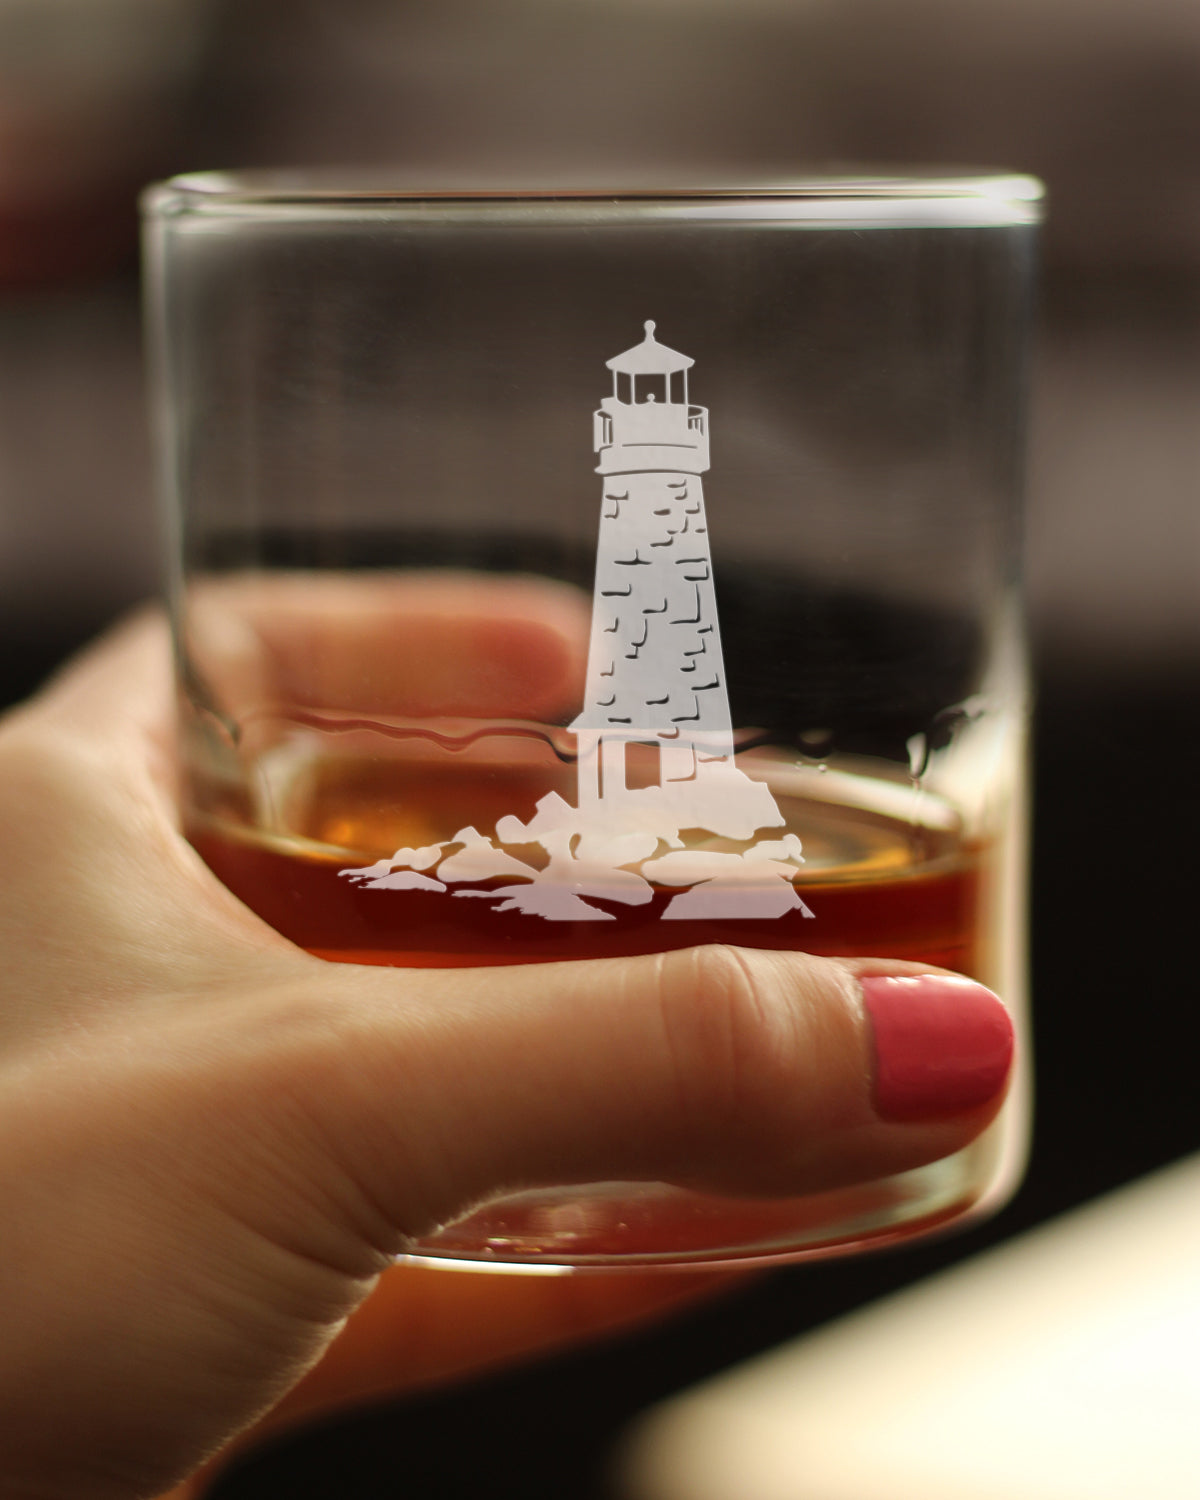 Lighthouse Whiskey Rocks Glass - Nautical Themed Decor and Gifts for Beach Lovers - 10.25 Oz Glasses